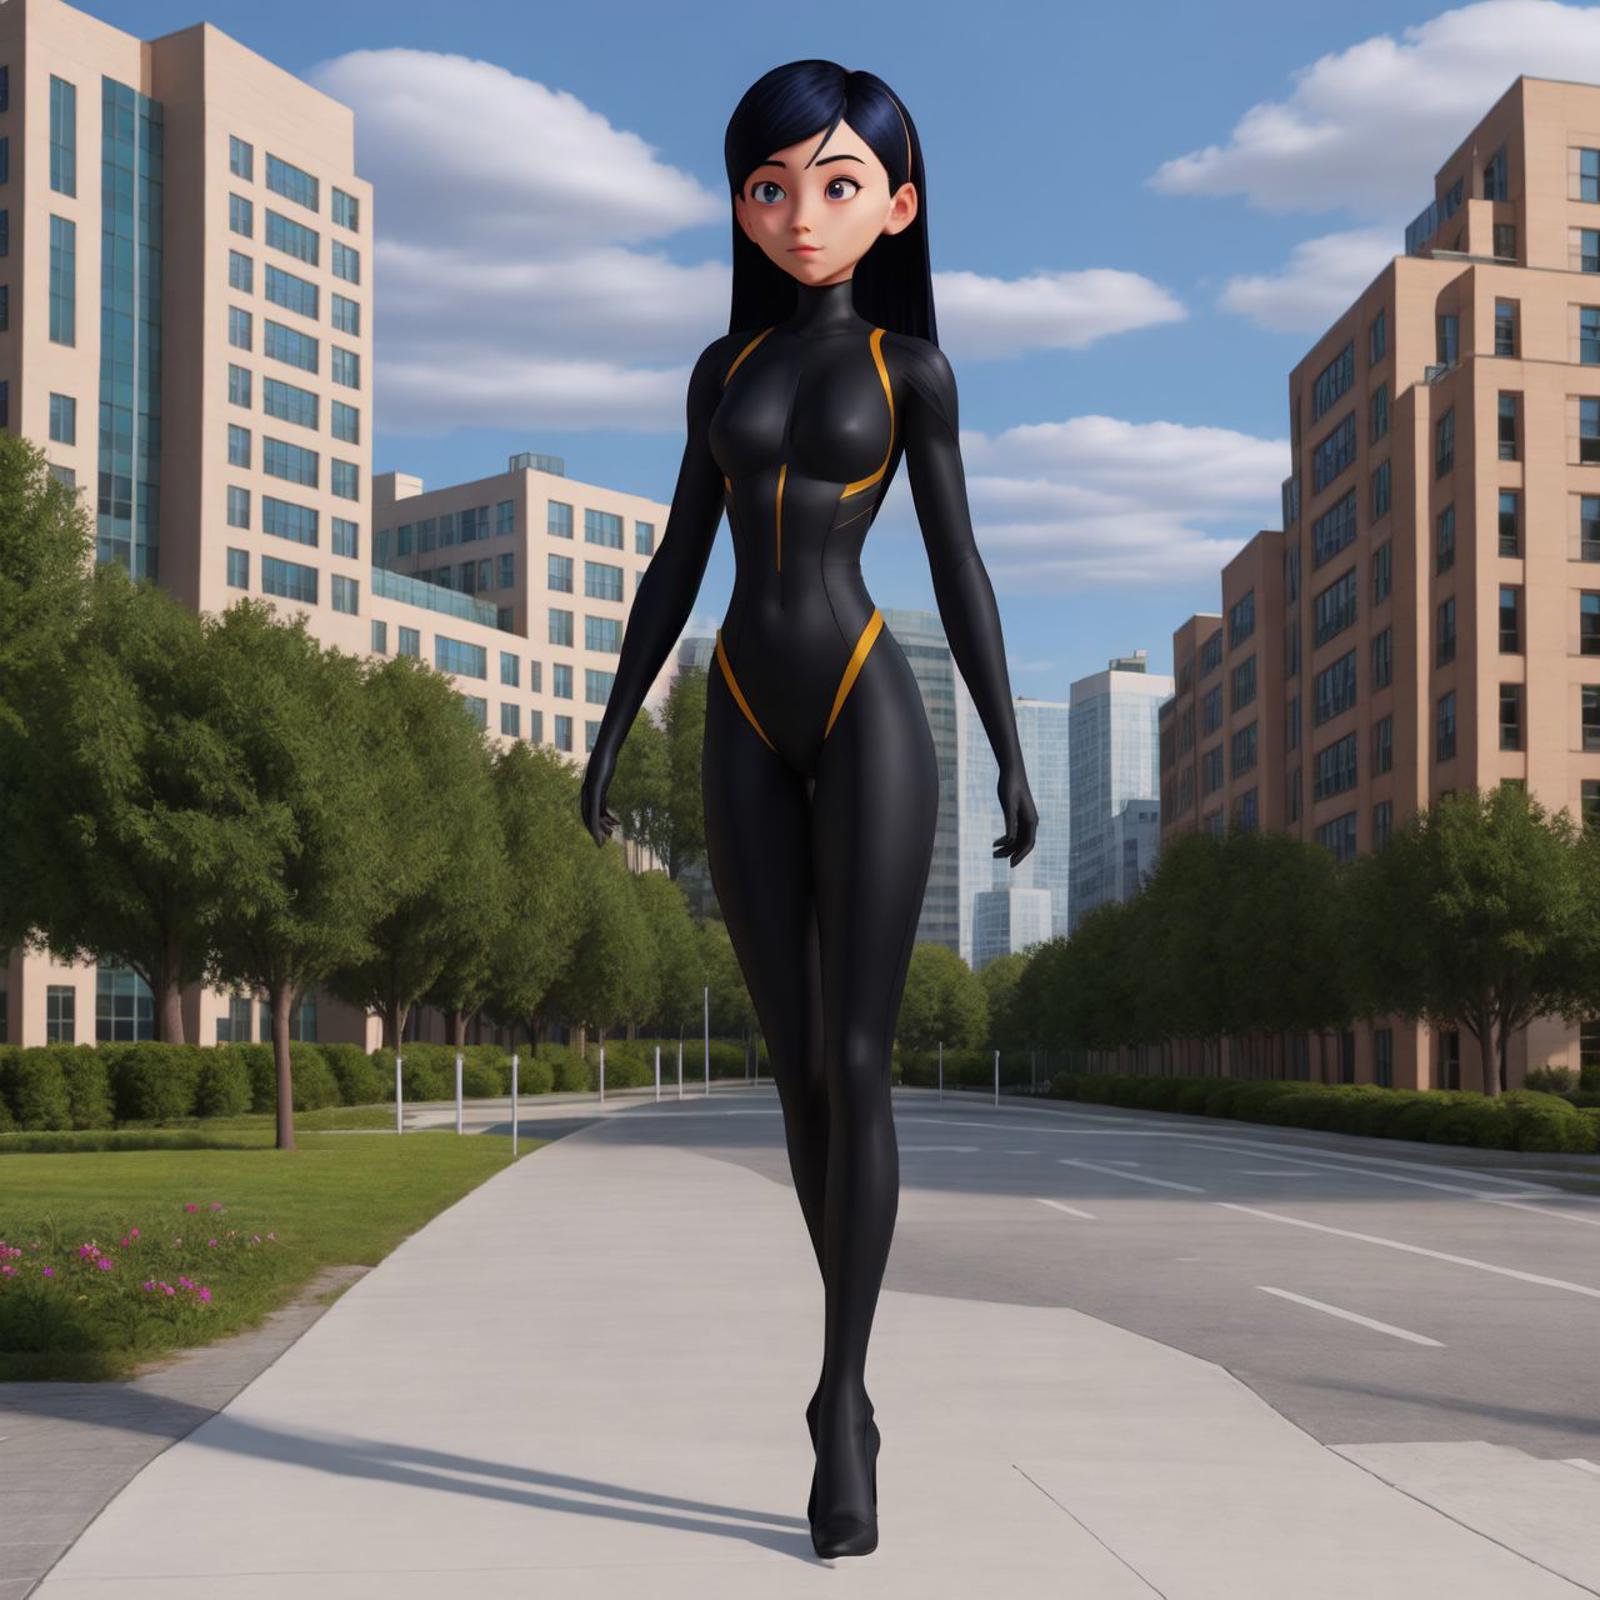 Violet Parr (The Incredibles) image by marusame